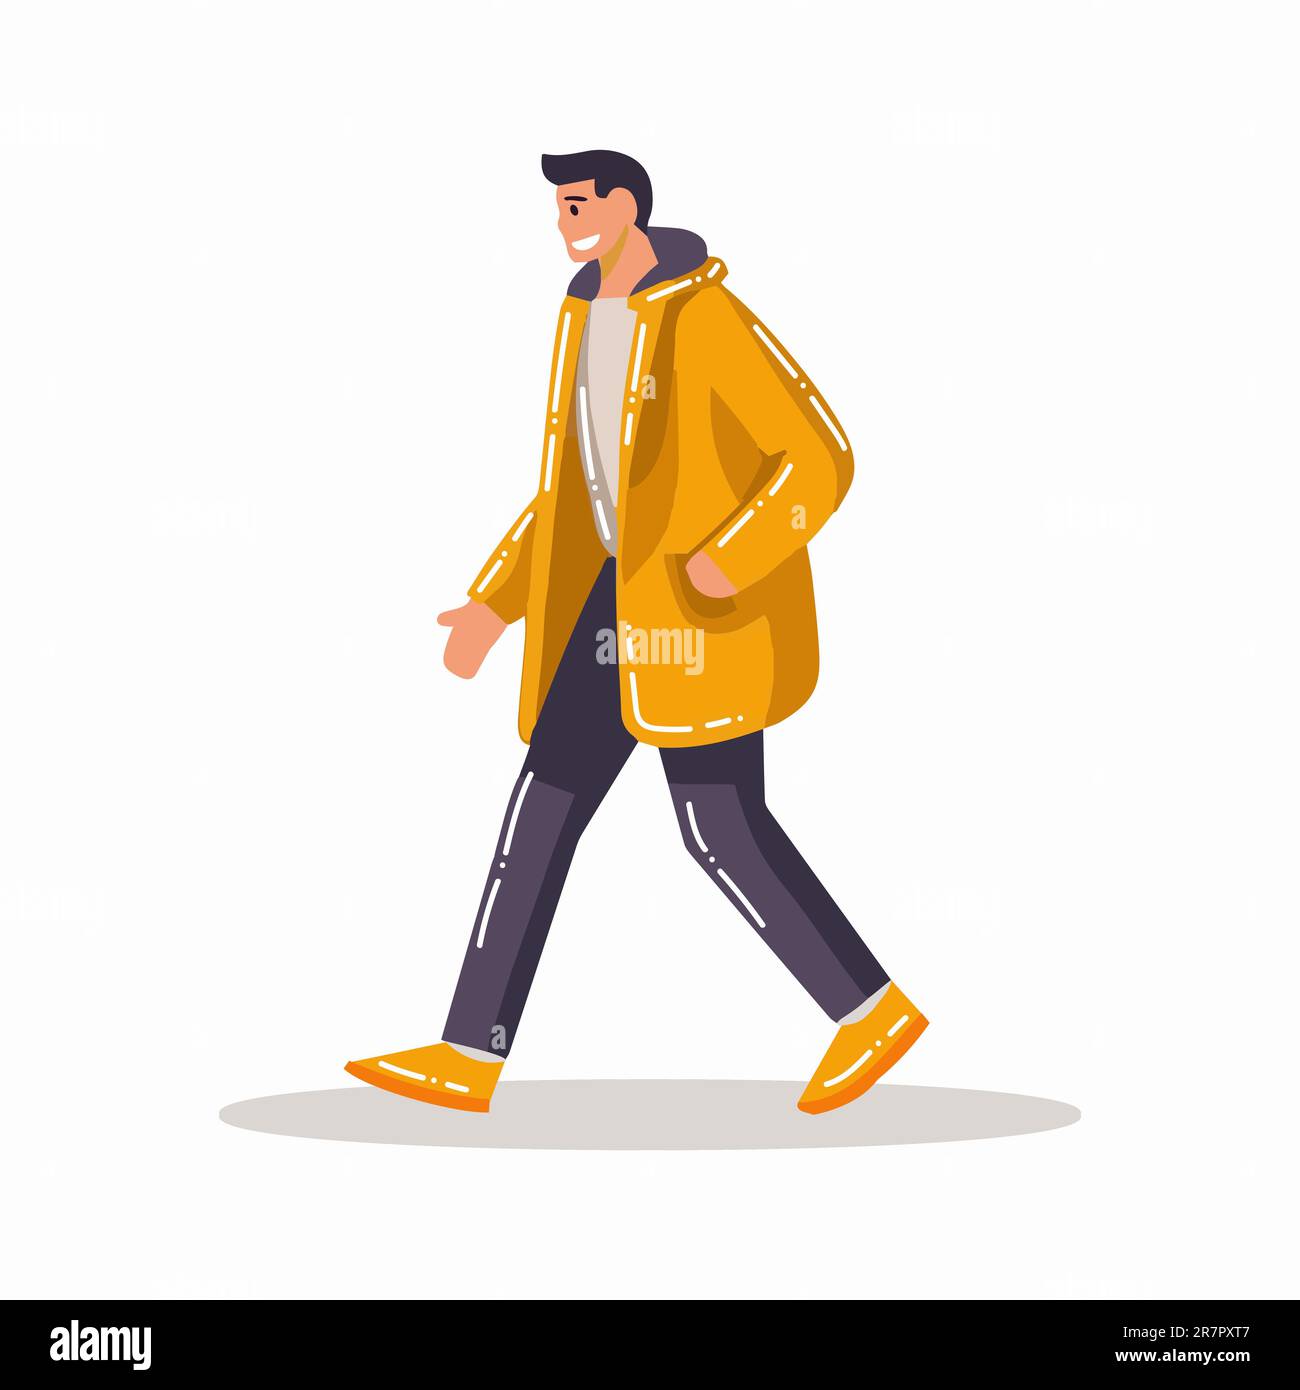 Hand Drawn man walking in flat style isolated on background Stock Photo